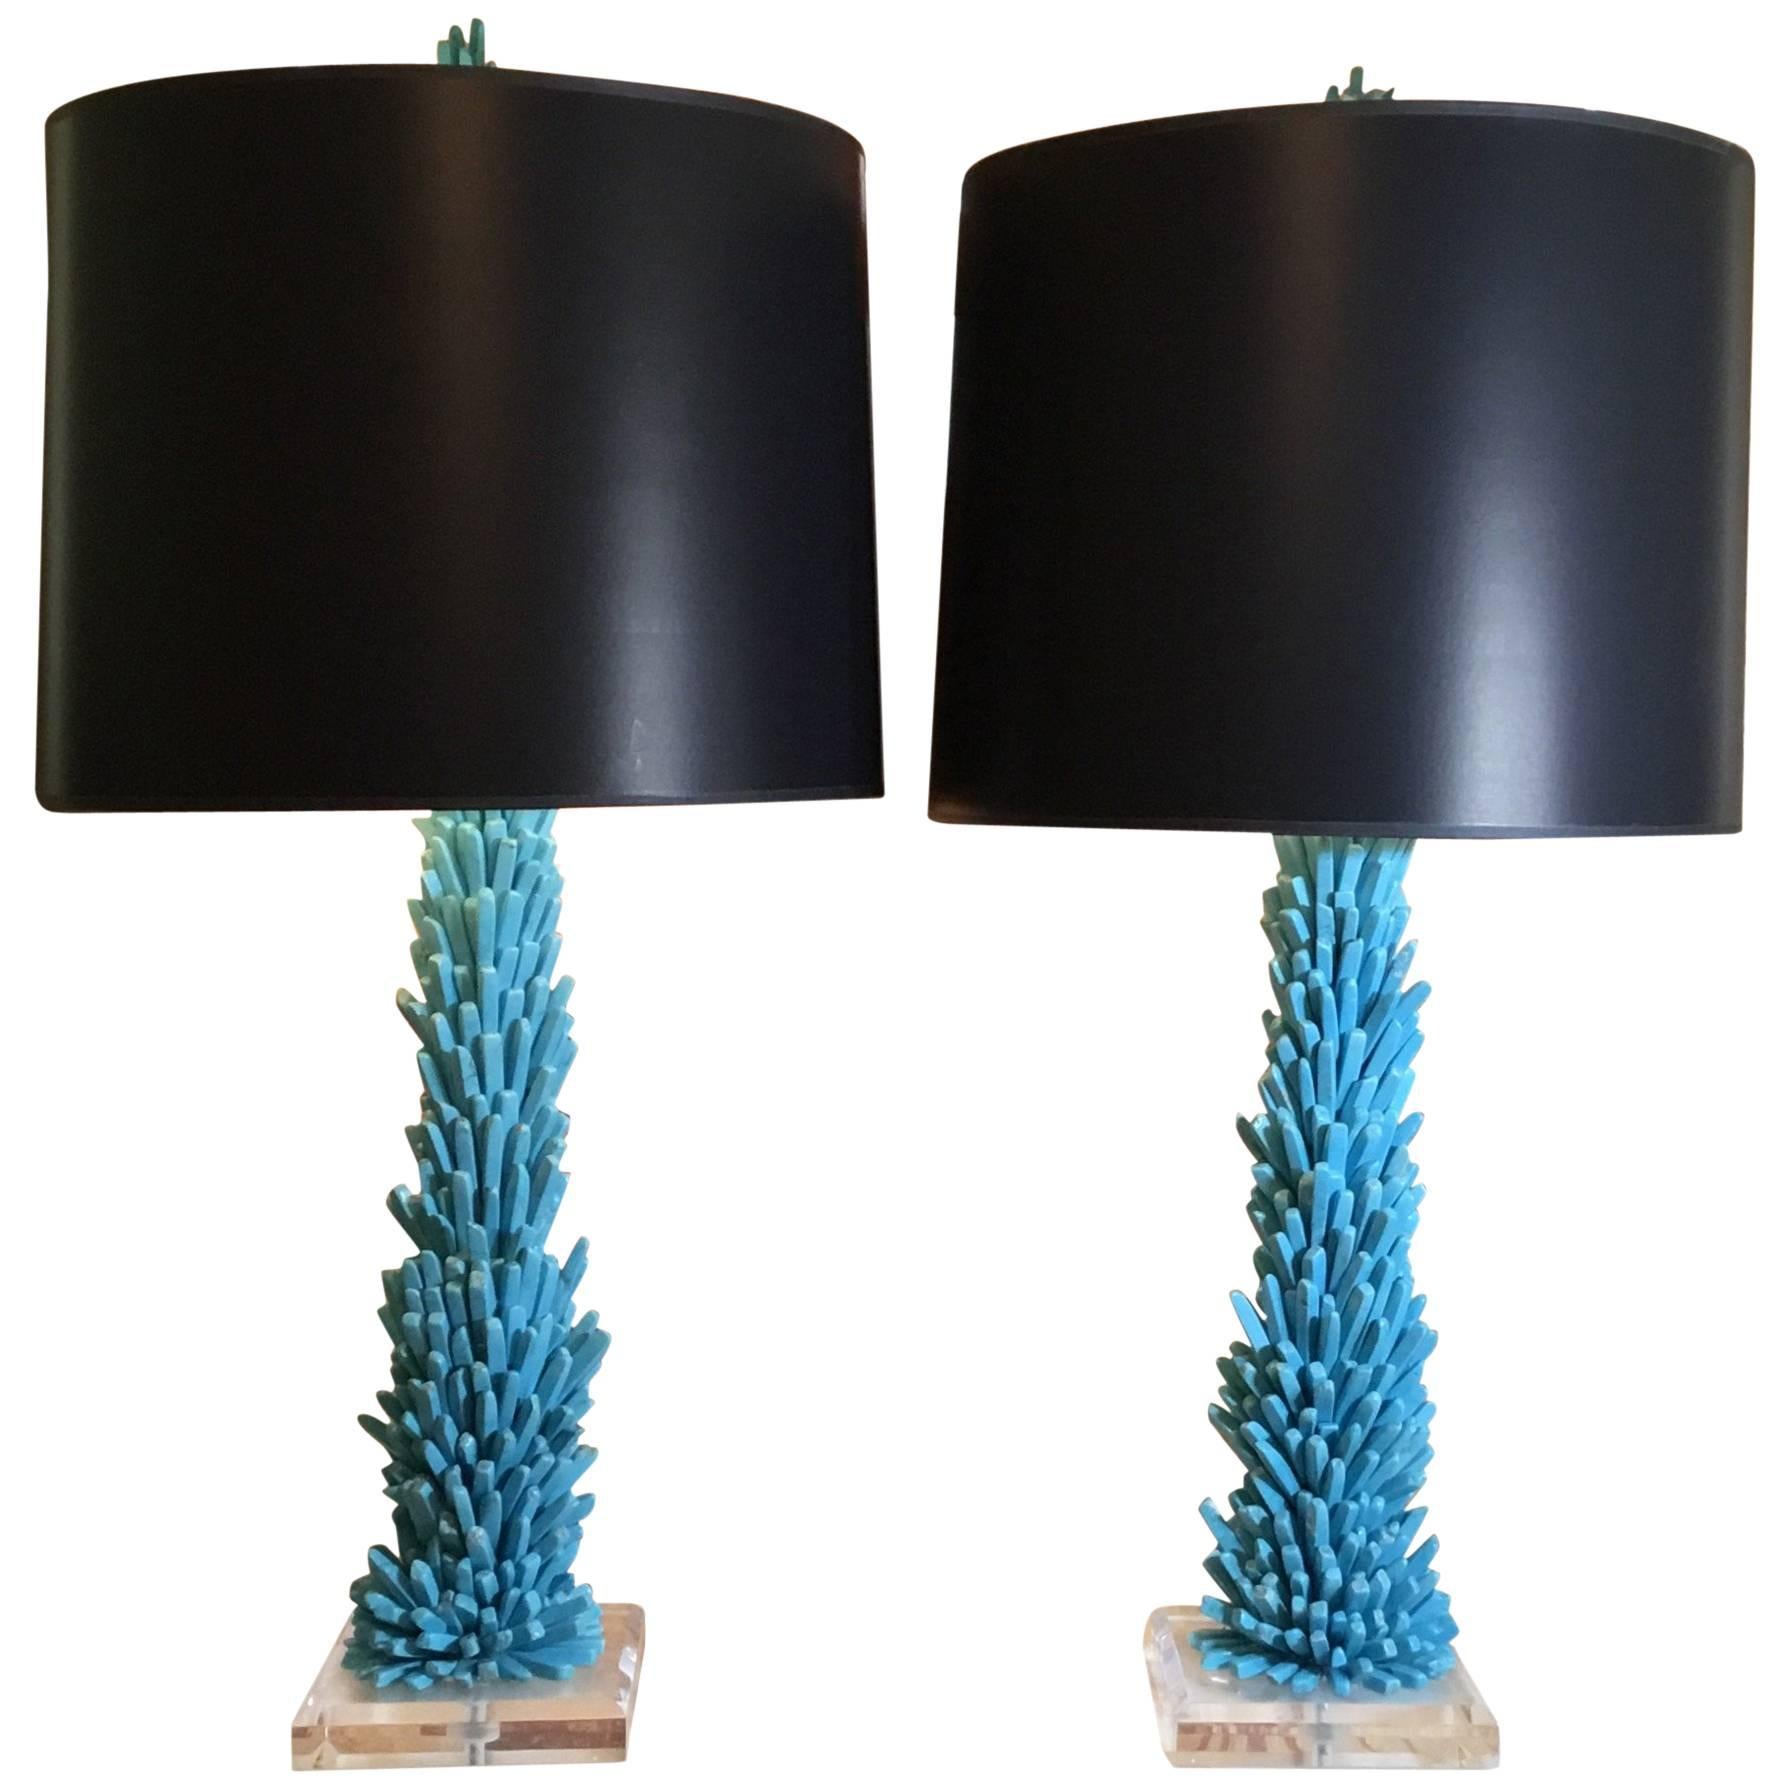 Pair of One of a Kind Turquoise Stone Lamps